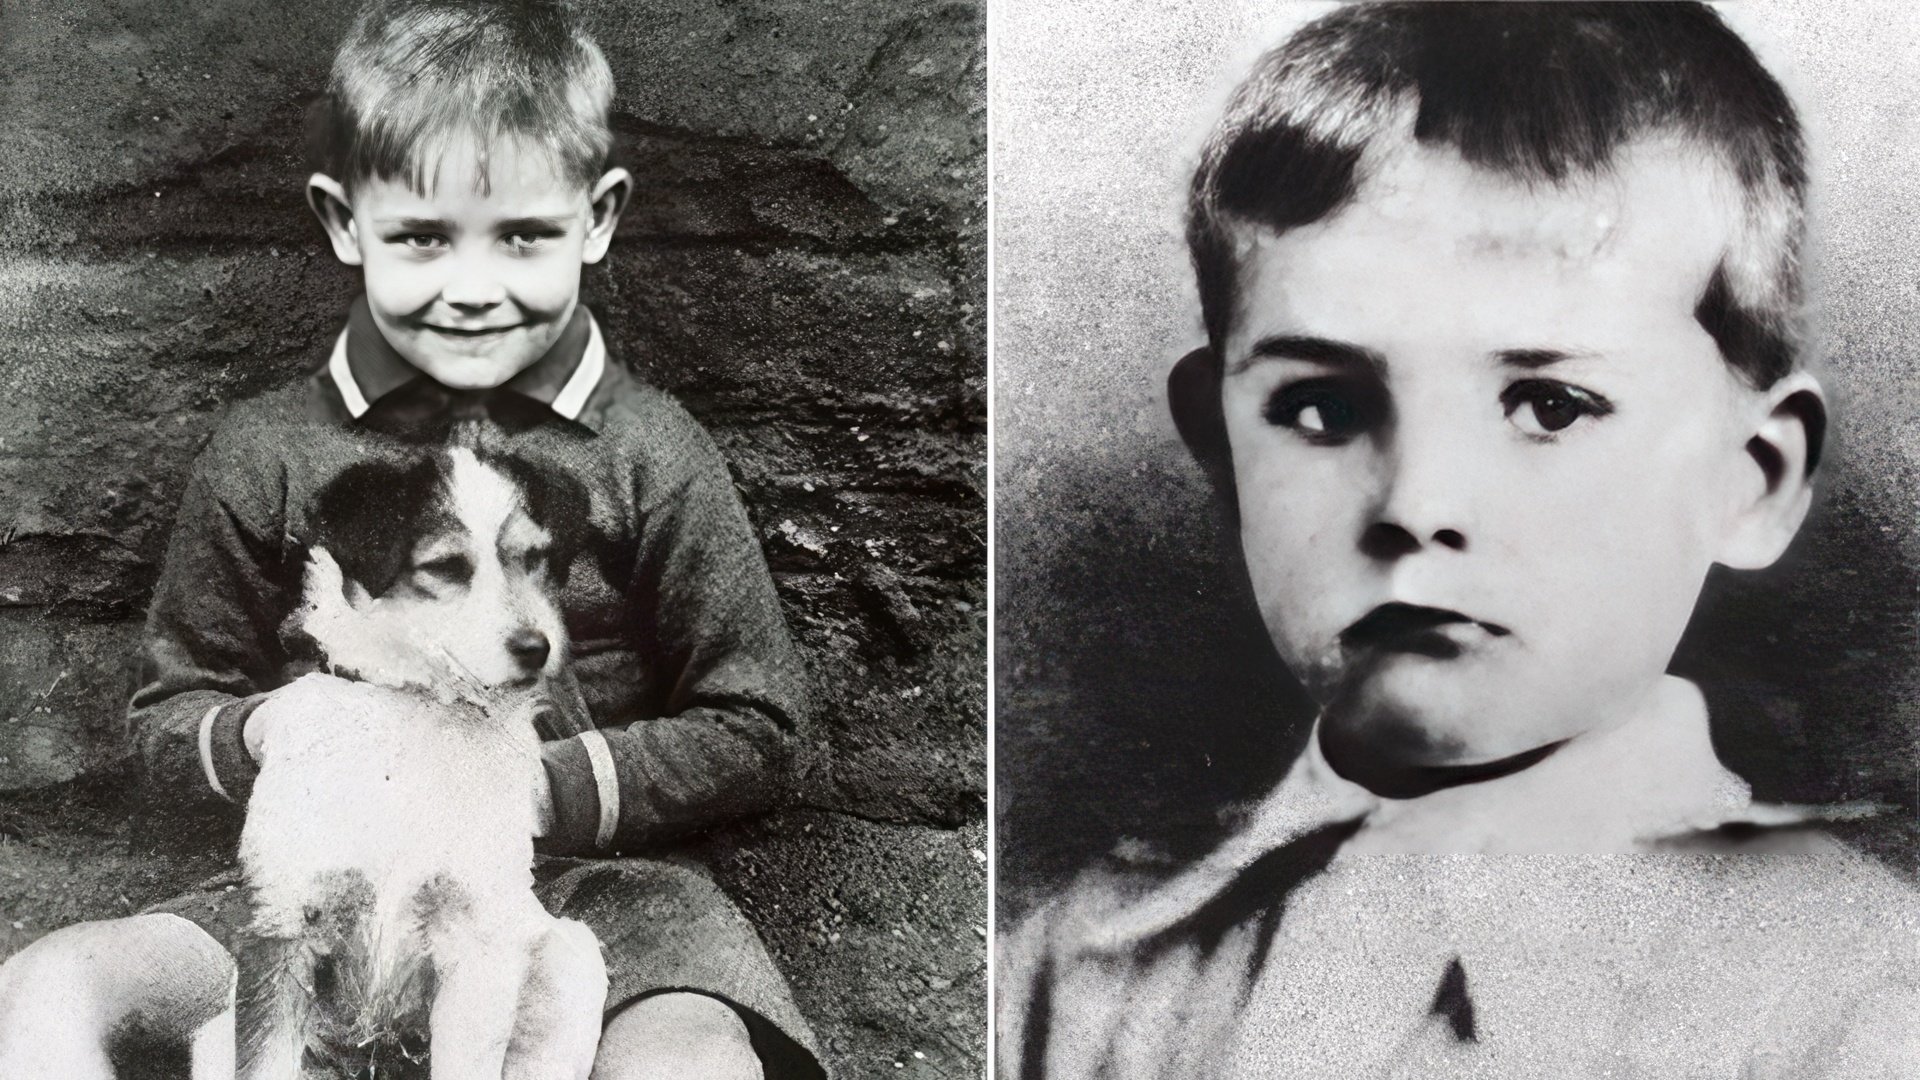 Sean Connery as a child